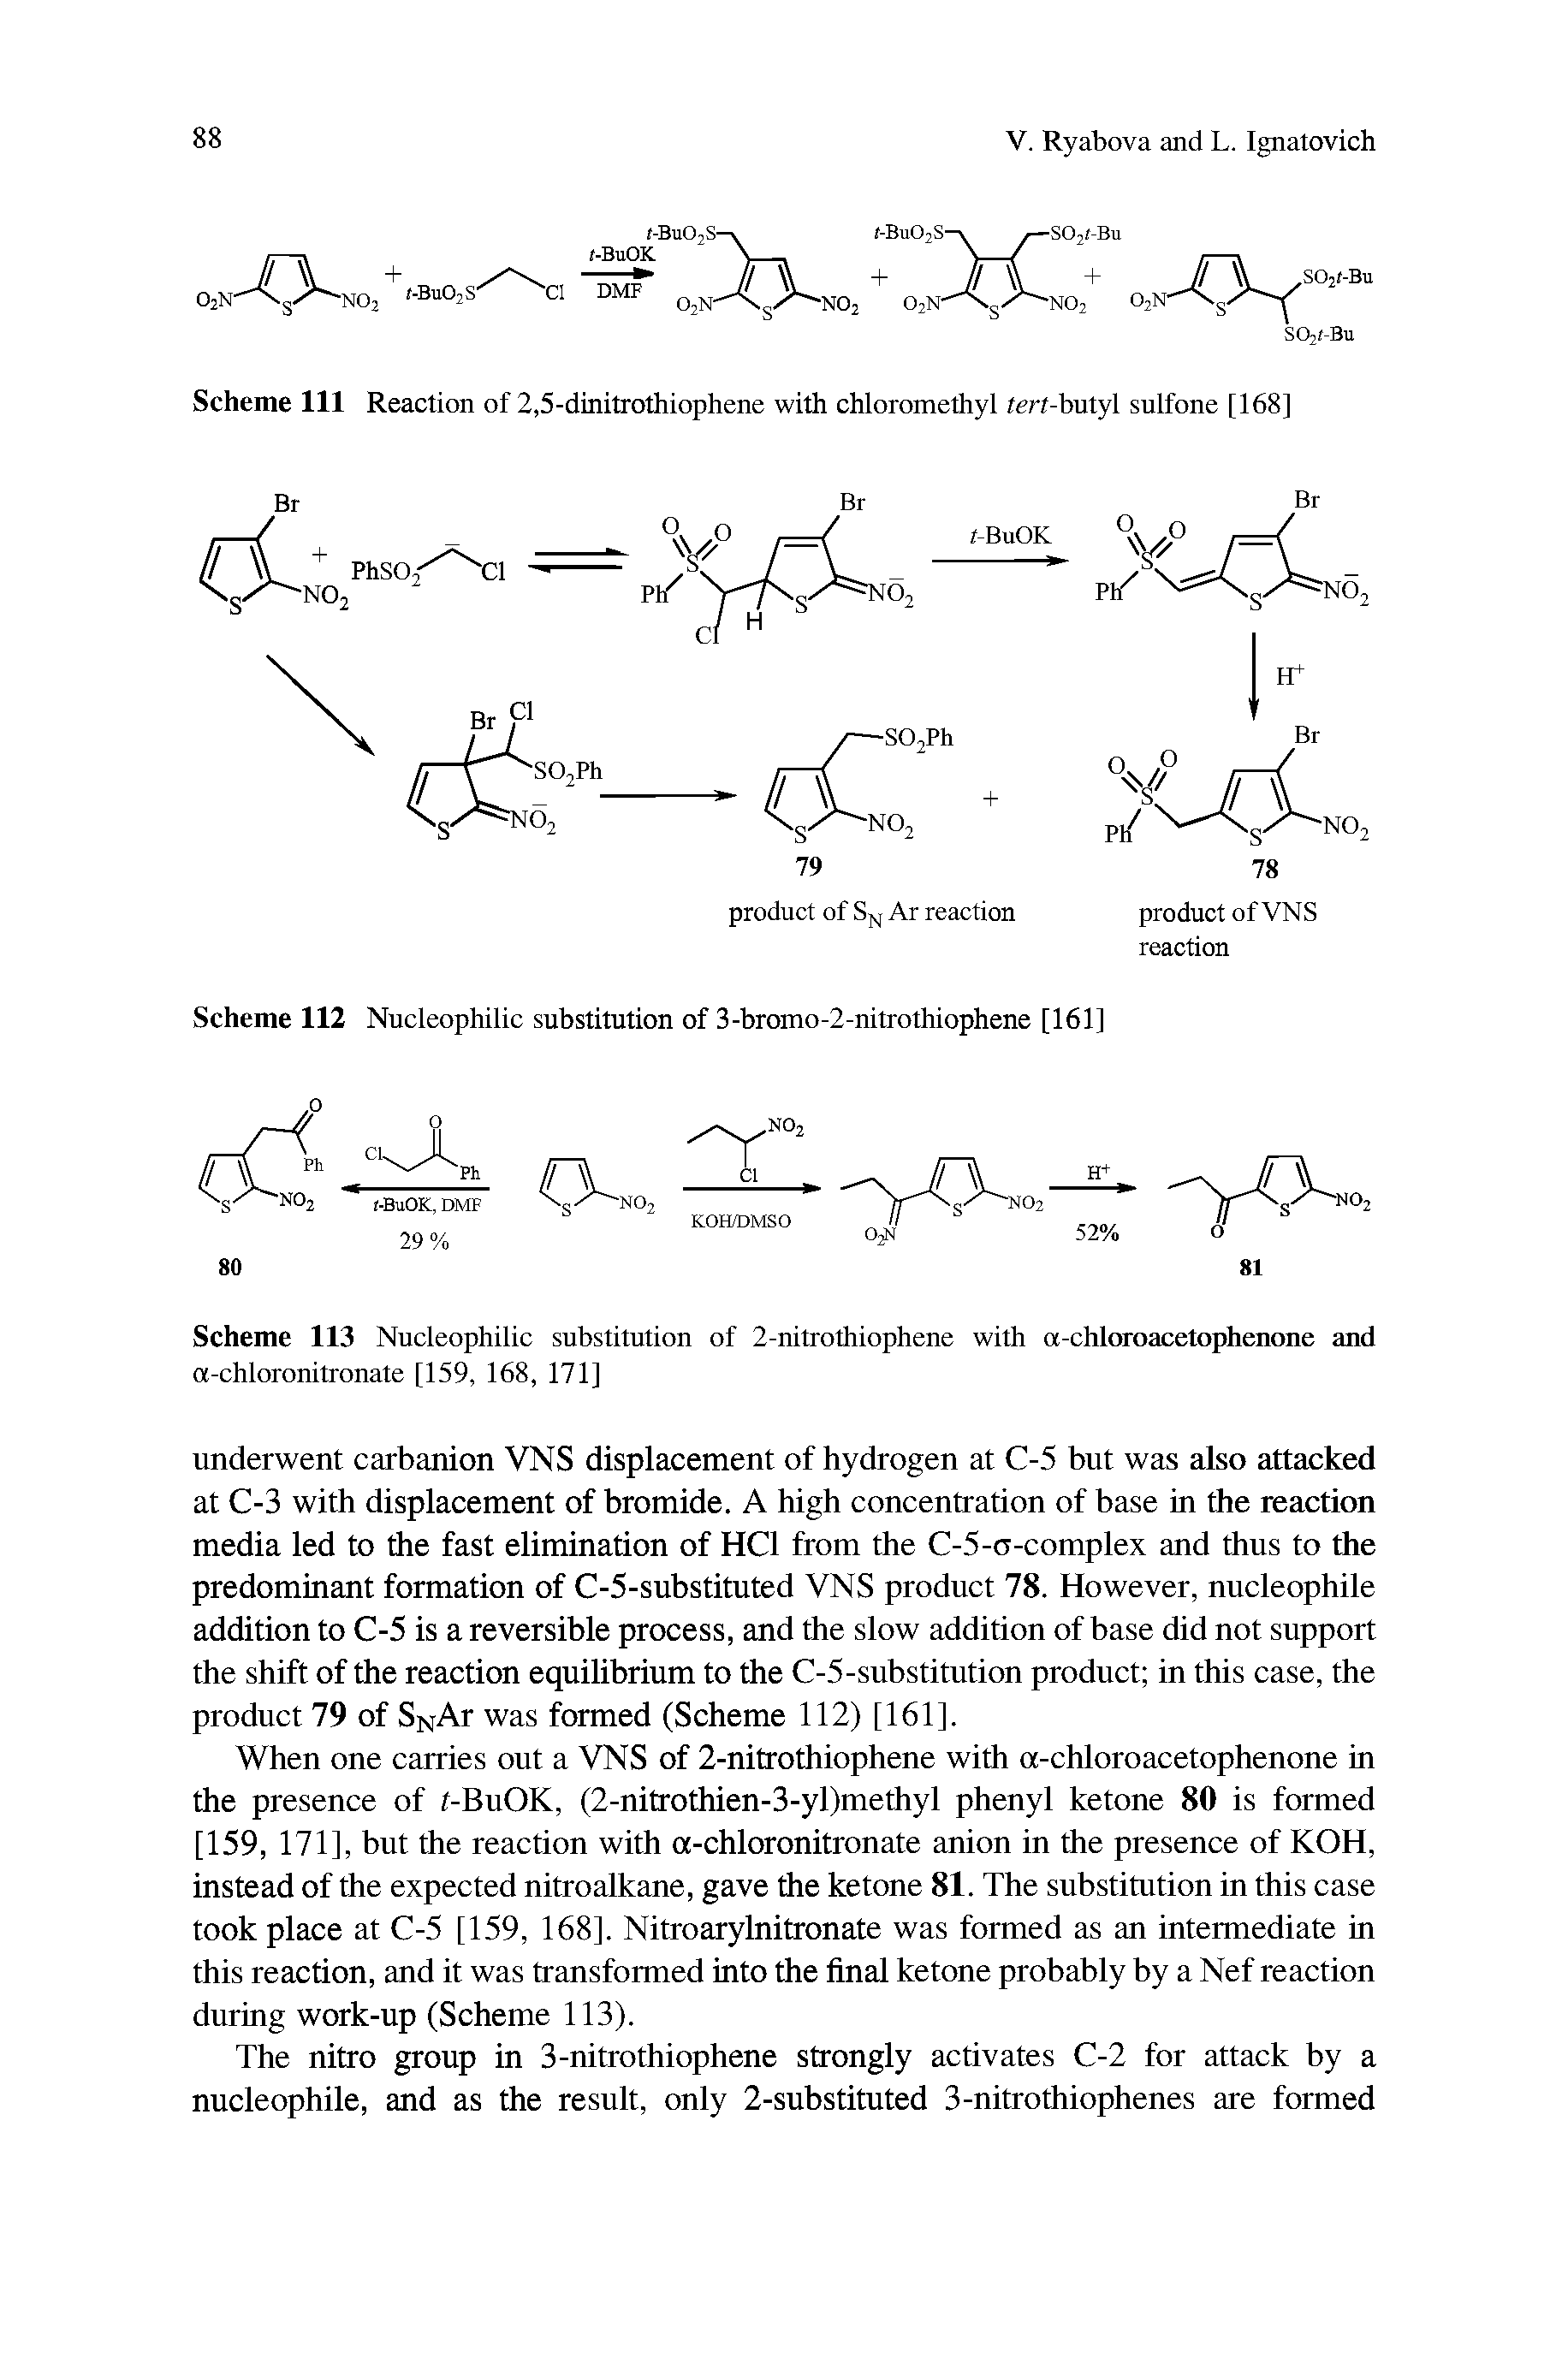 Scheme 113 Nucleophilic substitution of 2-nitrothiophene with a-chlOToacetophenone and a-chloronitronate [159, 168, 171]...